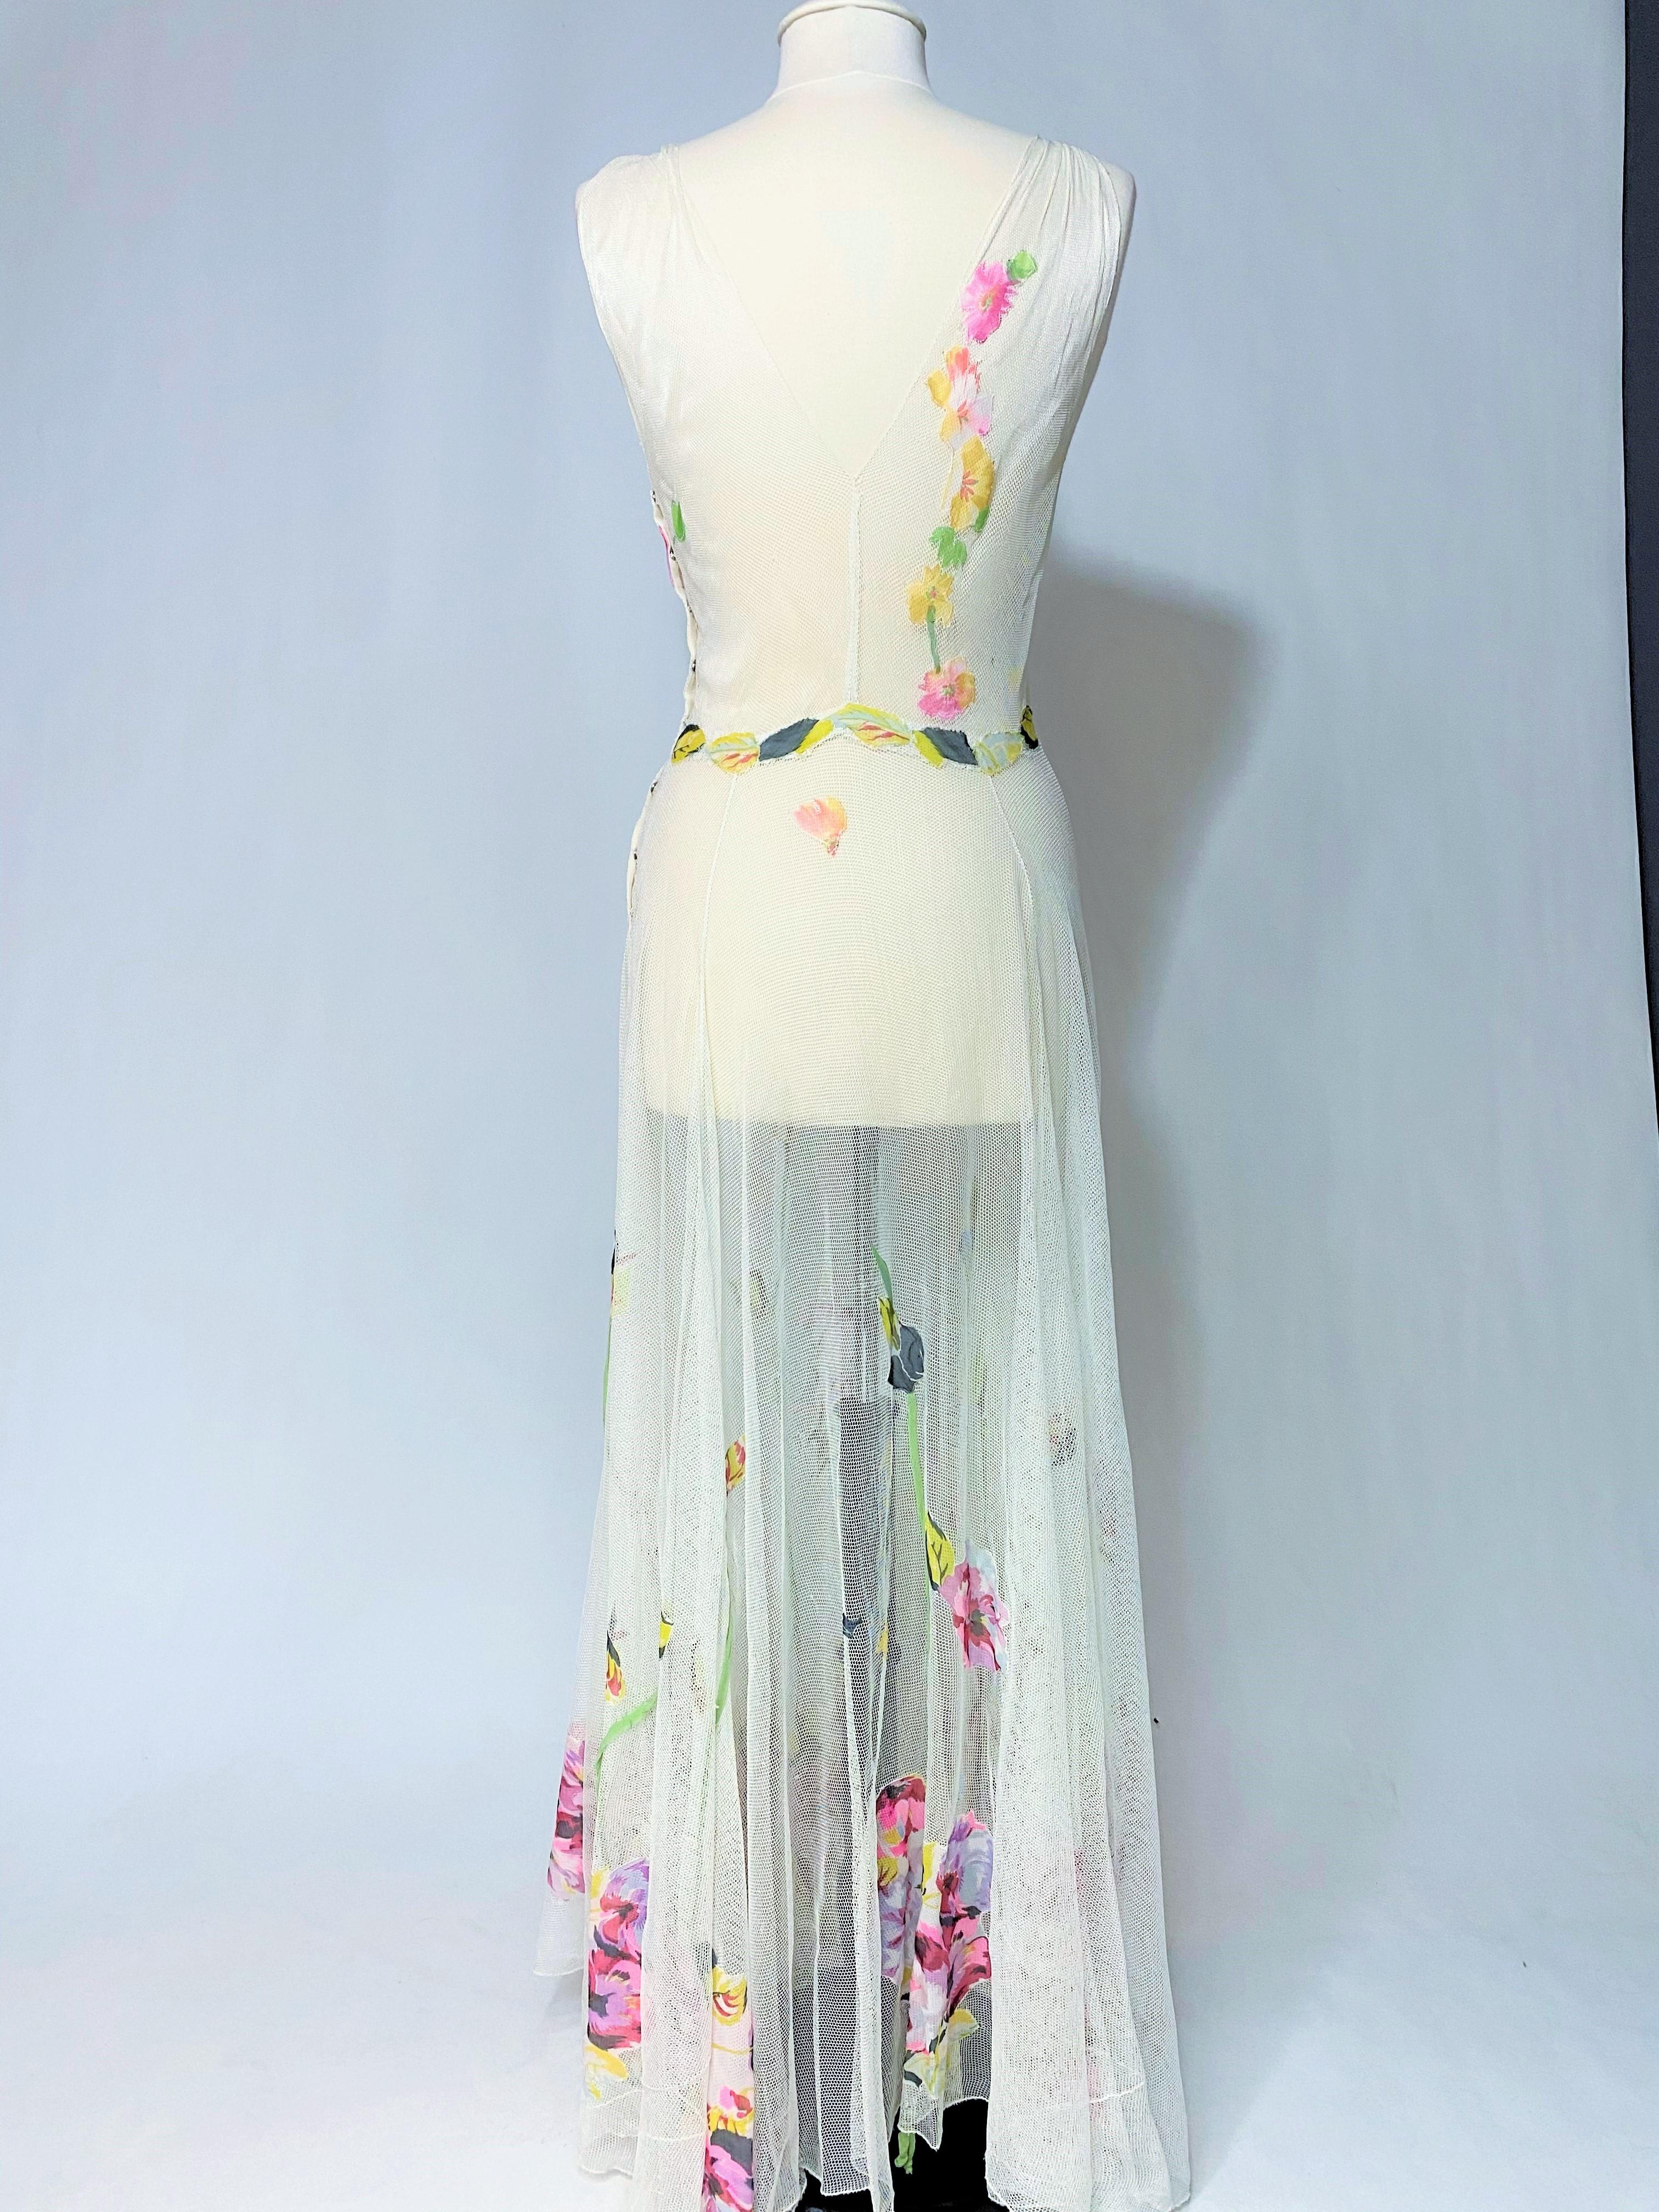 A Romantic Dress in white cotton Net applied with printed Chiffon Circa 1938 For Sale 8